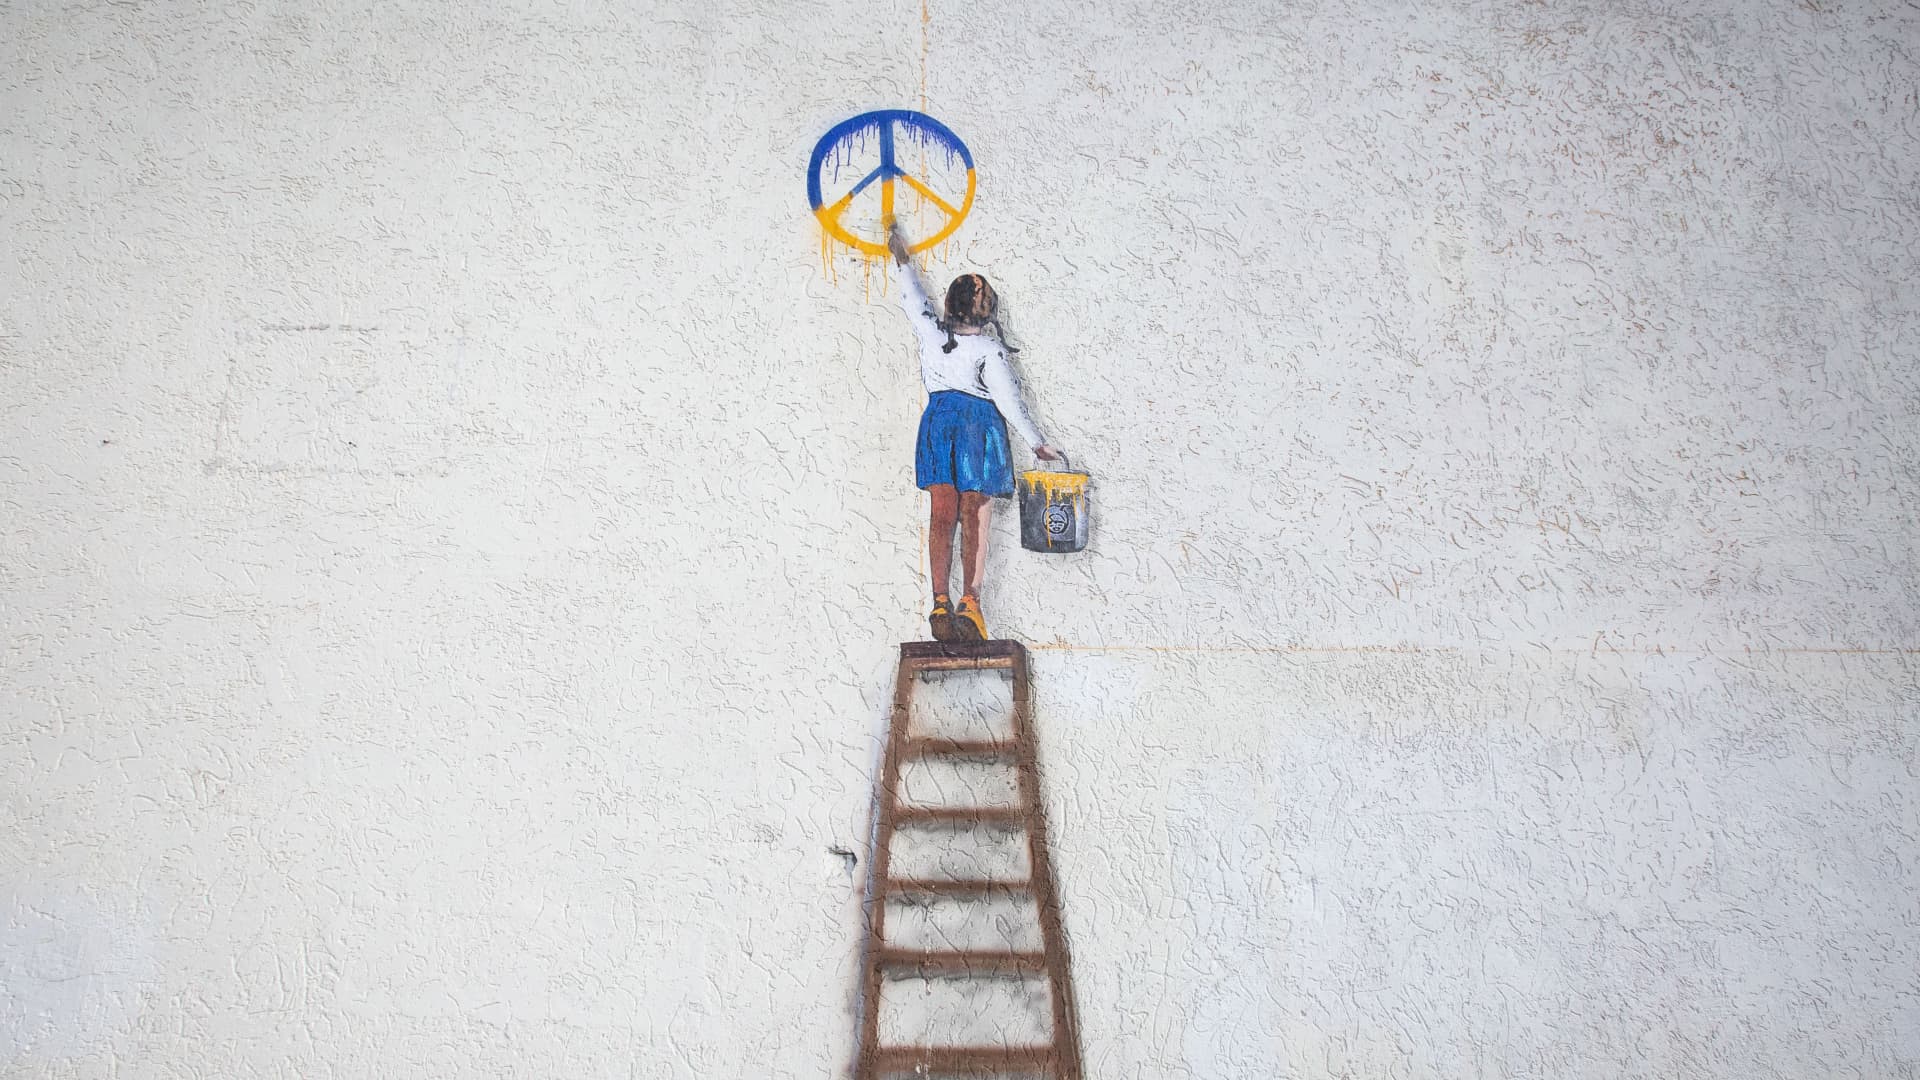 An art work by famous Italian street artist Tvboy created on a wall of a local school in the center of the town of Bucha, near Kyiv, Ukraine, on February 2, 2023. 